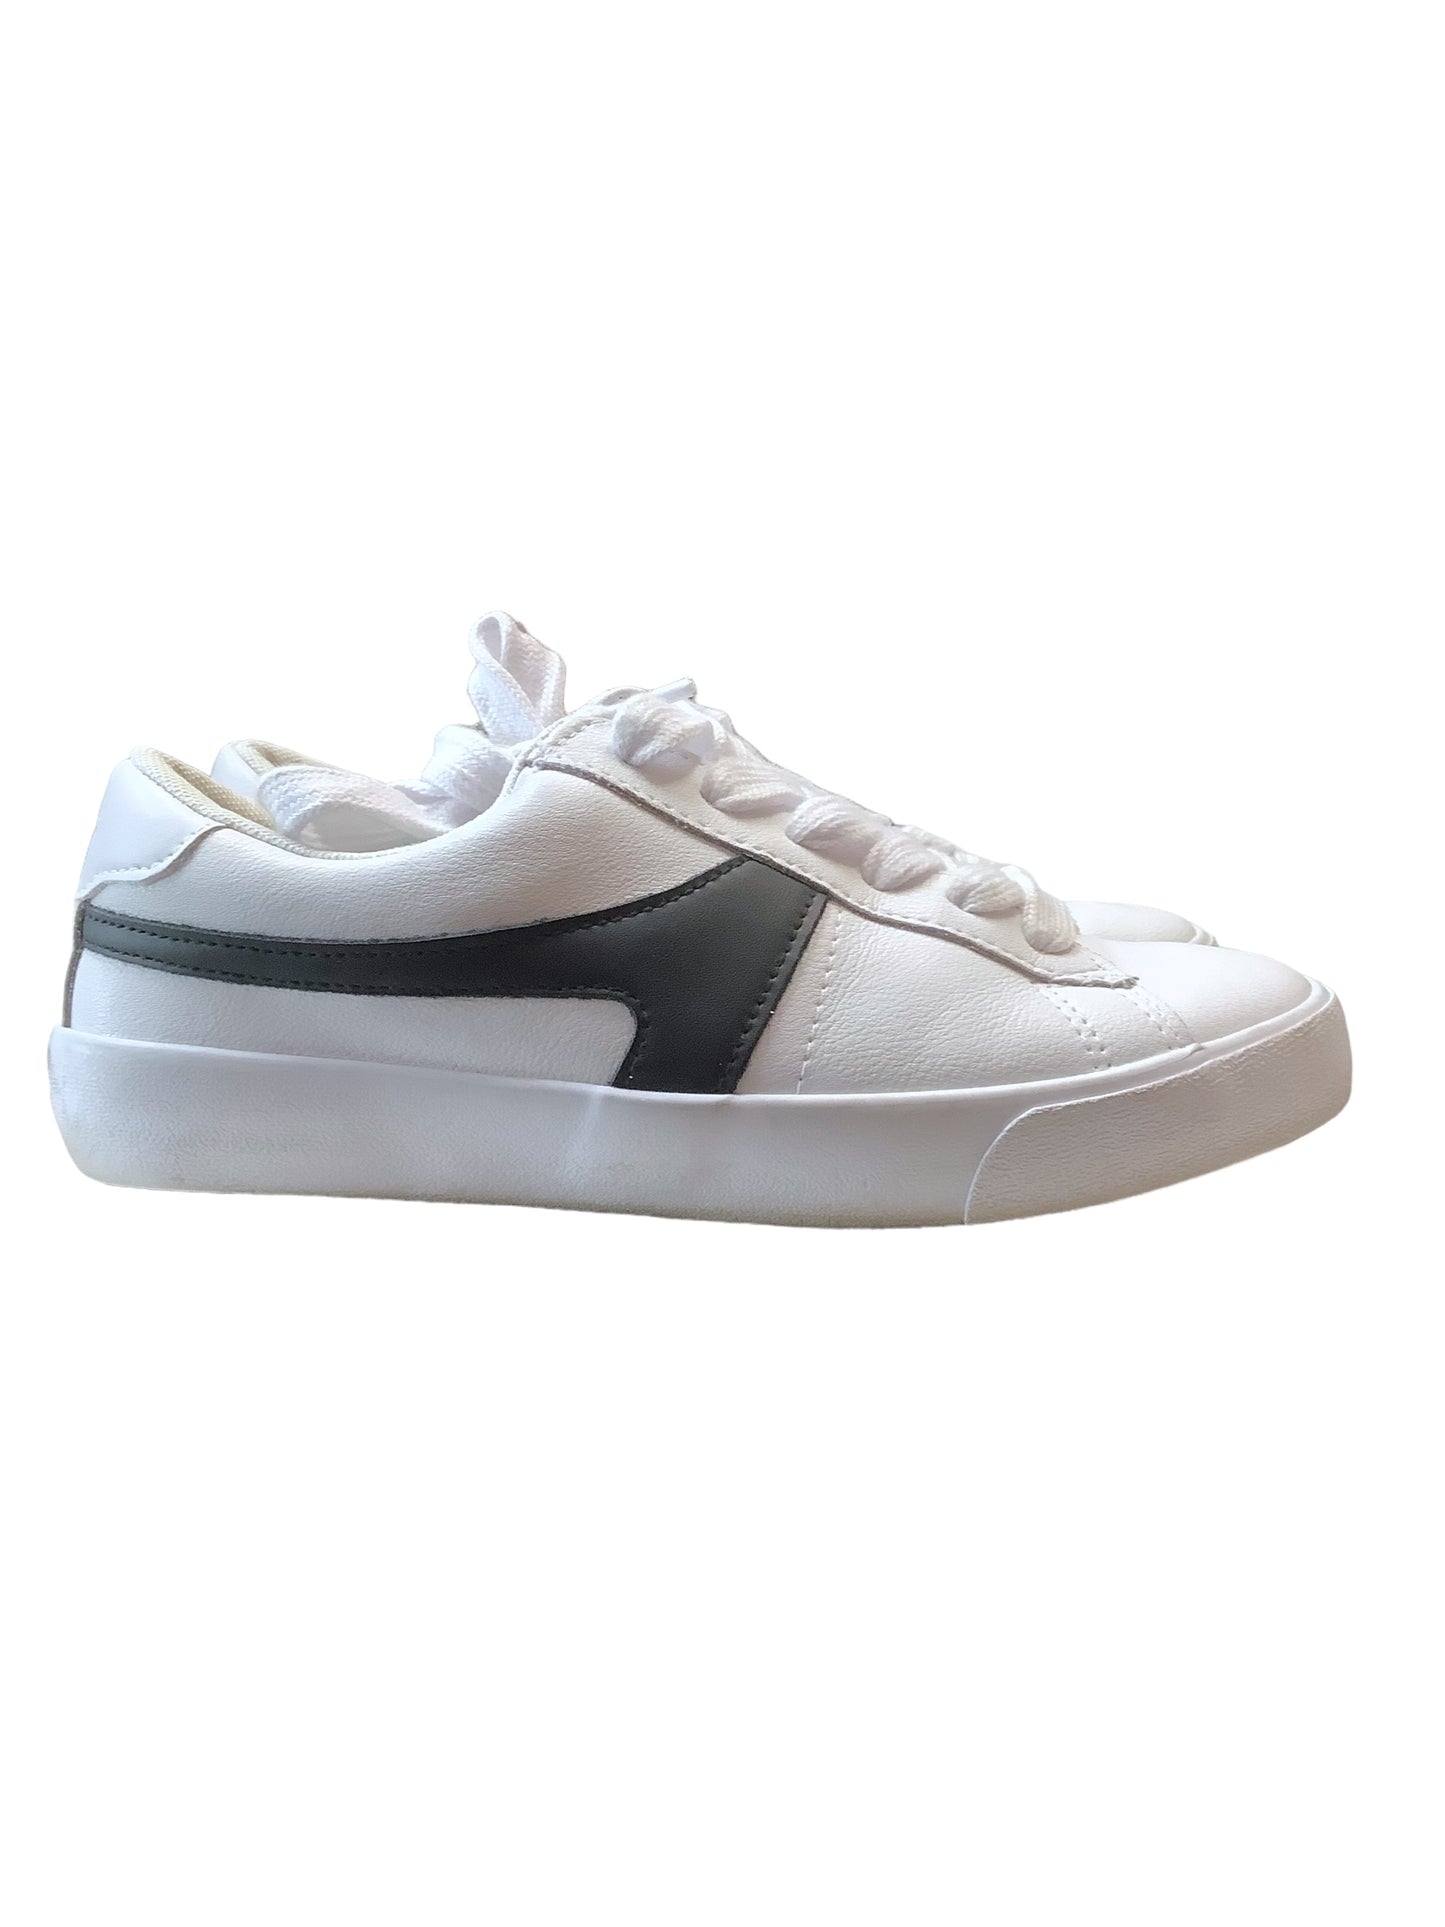 Shoes Athletic By Rachel Zoe  Size: 6.5